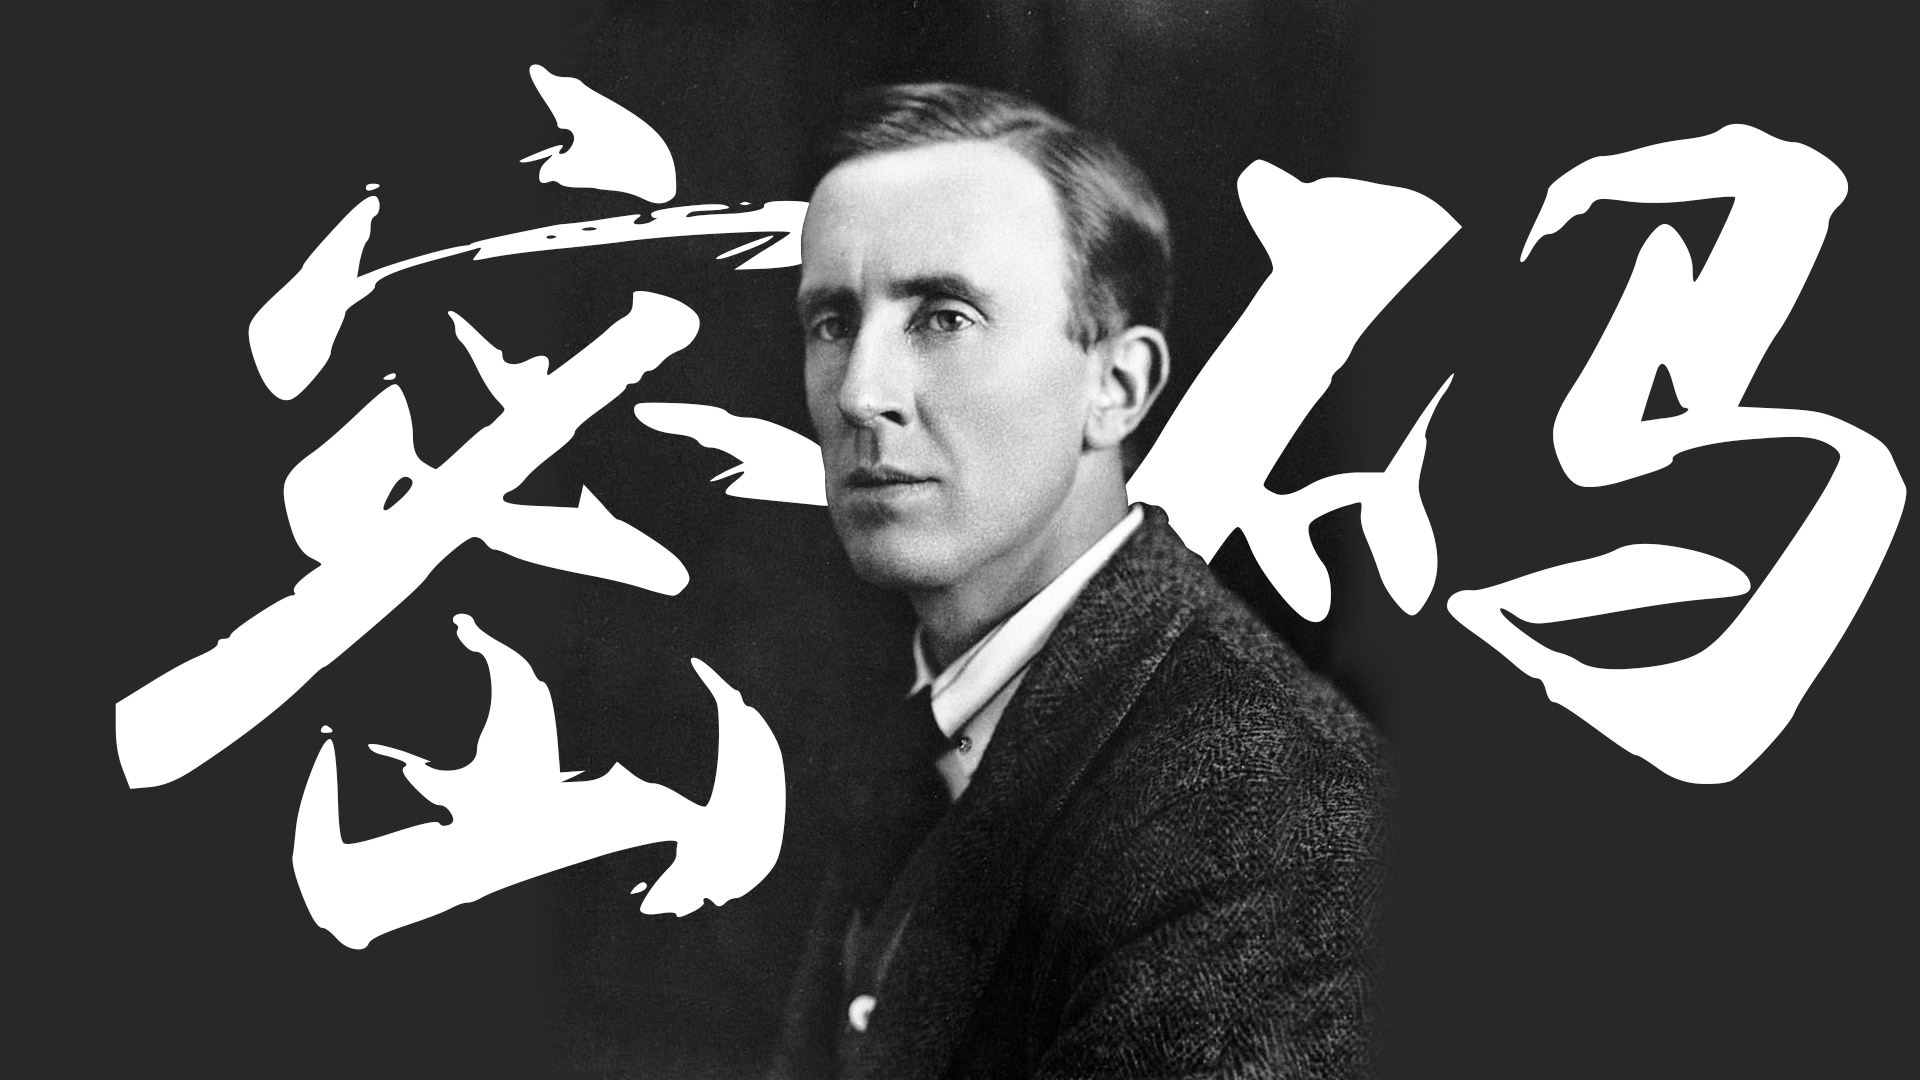 Tolkien in the 40's, backdropped by the chinese characters for secret, 密码